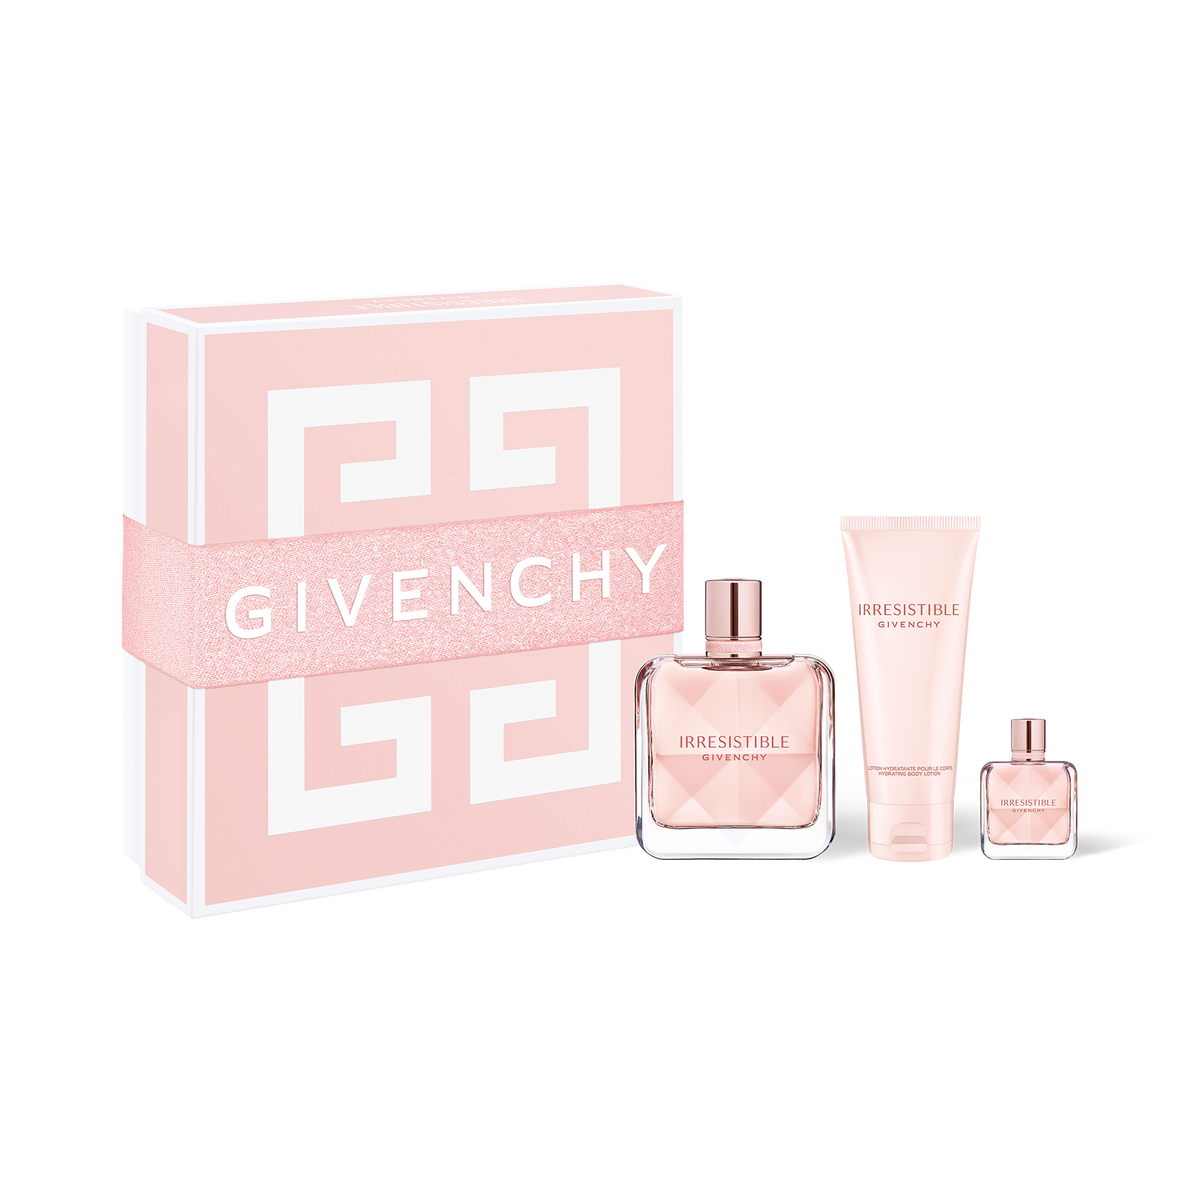 Very Irresistible Givenchy Eau de Toilette 2.5oz – always special perfumes  & gifts